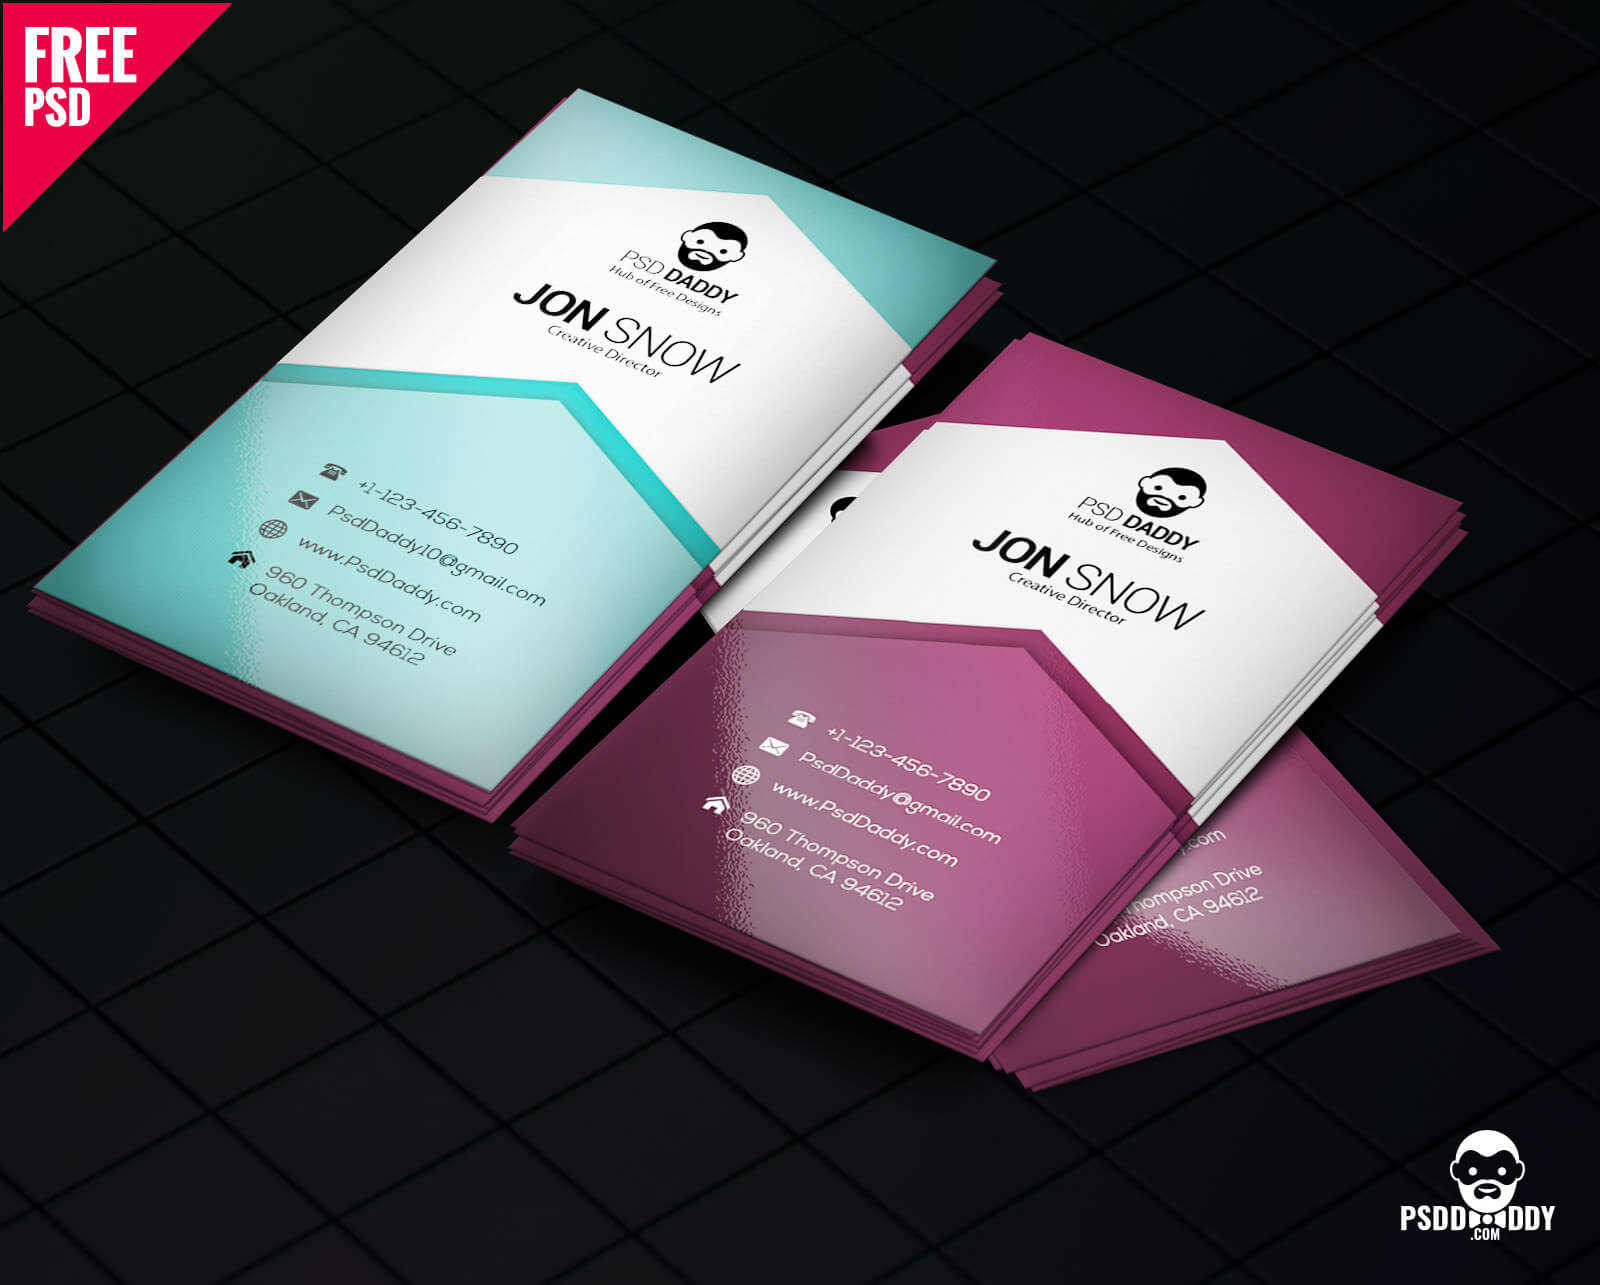 Download]Creative Business Card Psd Free | Psddaddy With Regard To Iphone Business Card Template